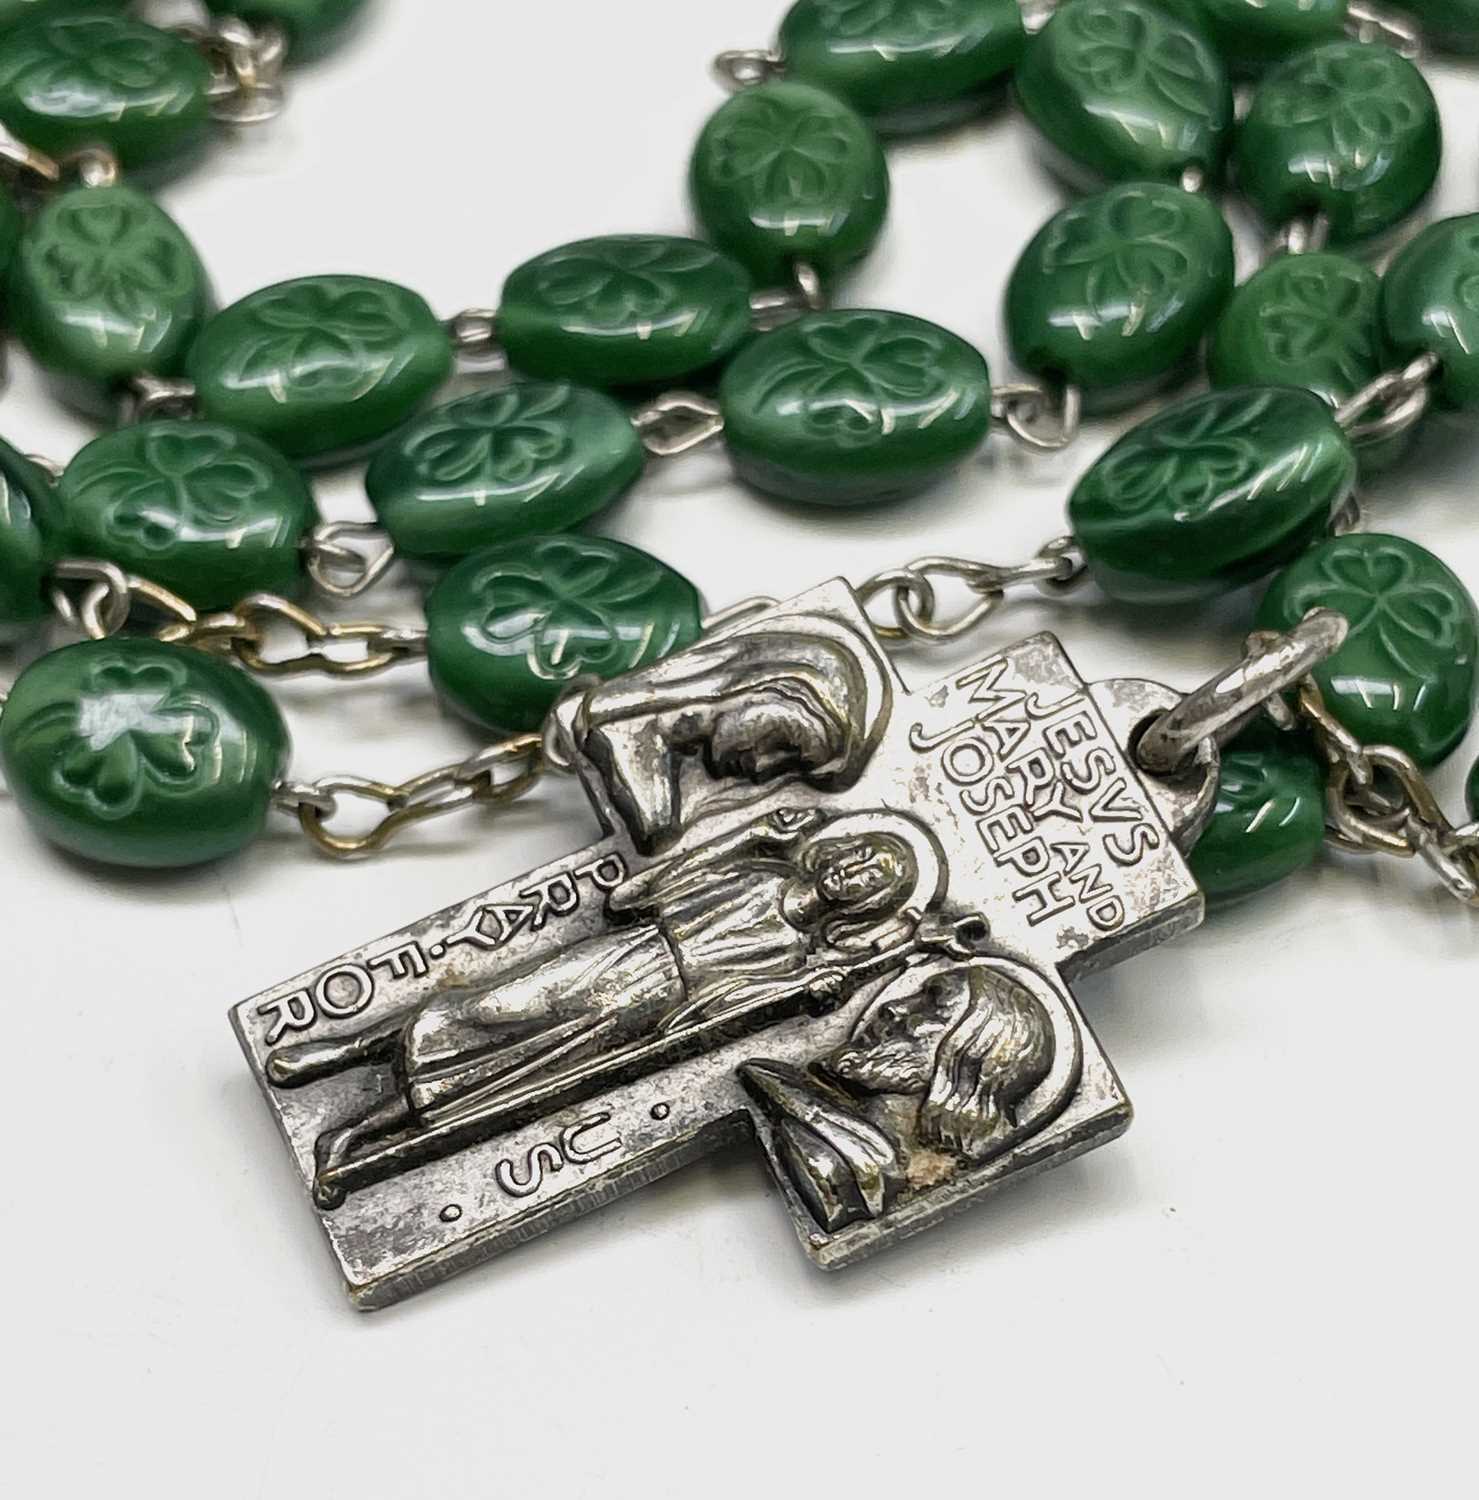 Fifteen rosary bead necklaces, all with unique decorative crosses. - Image 6 of 20